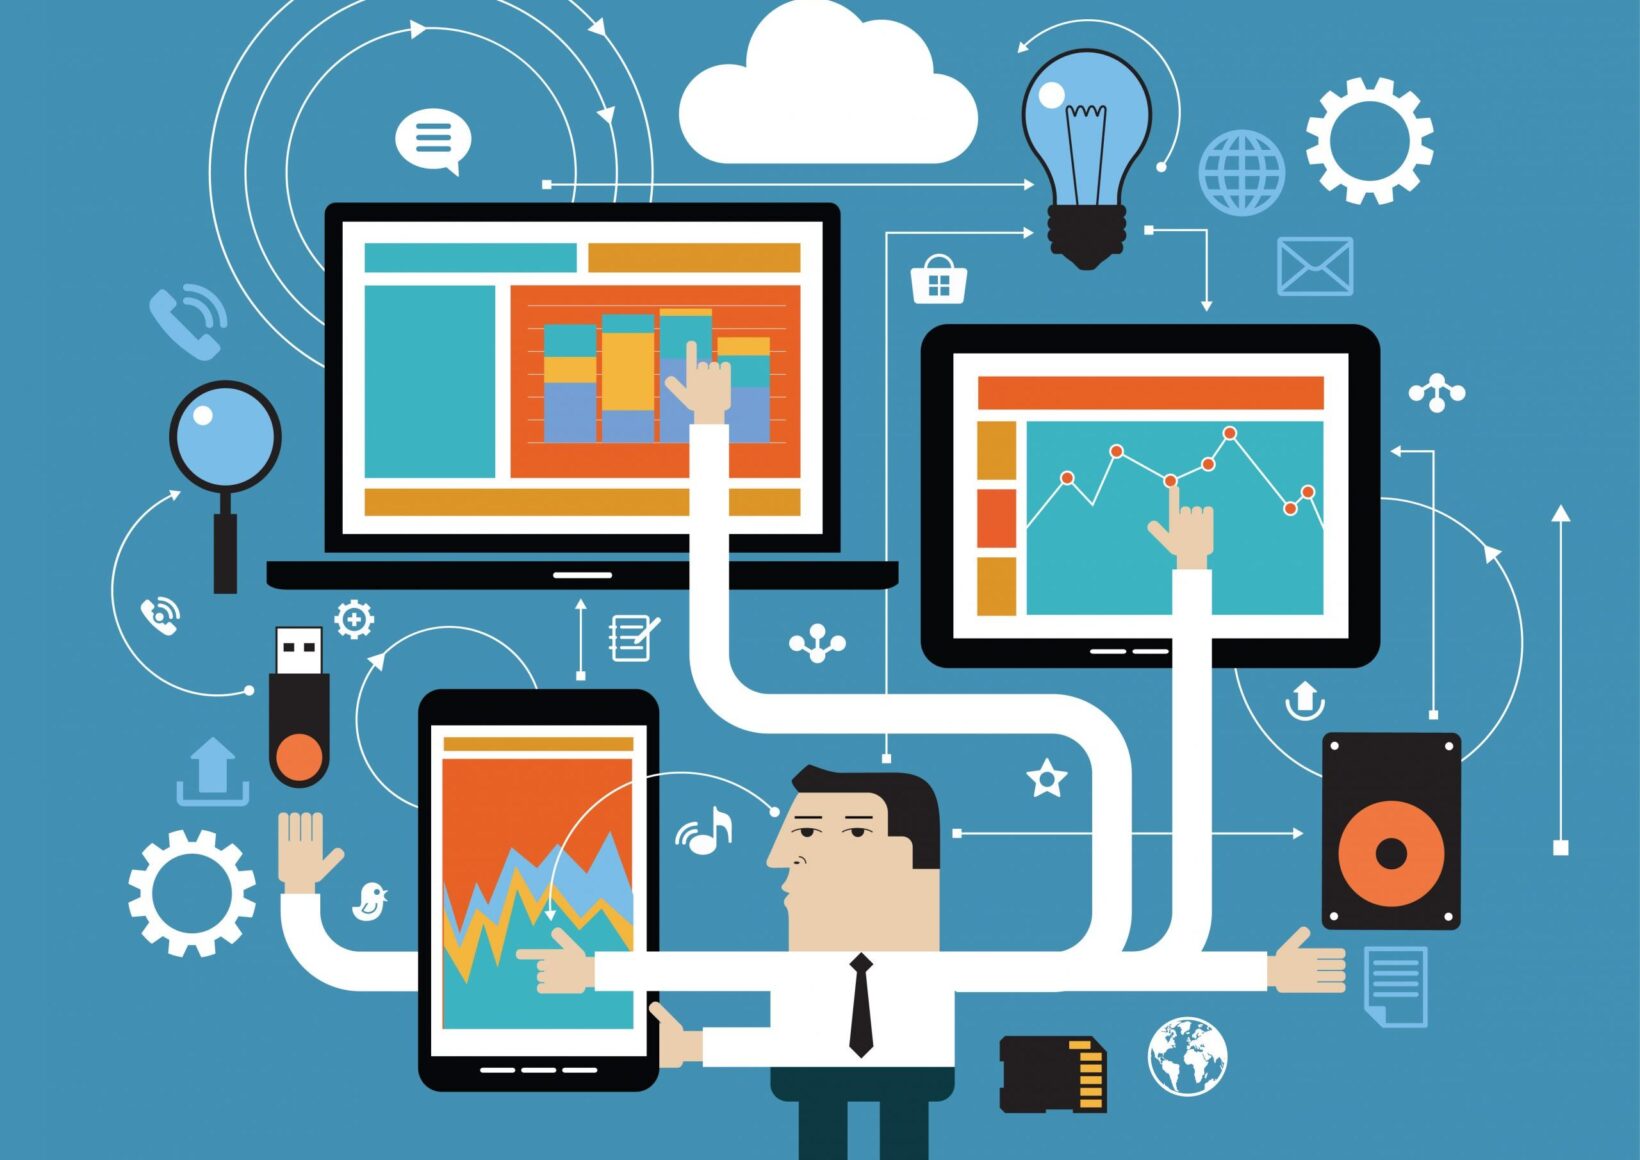 A cubist-style illustration of a man with several arms that appear to be reaching out to various icons of technology- gears, computer screens, light bulbs, etc.